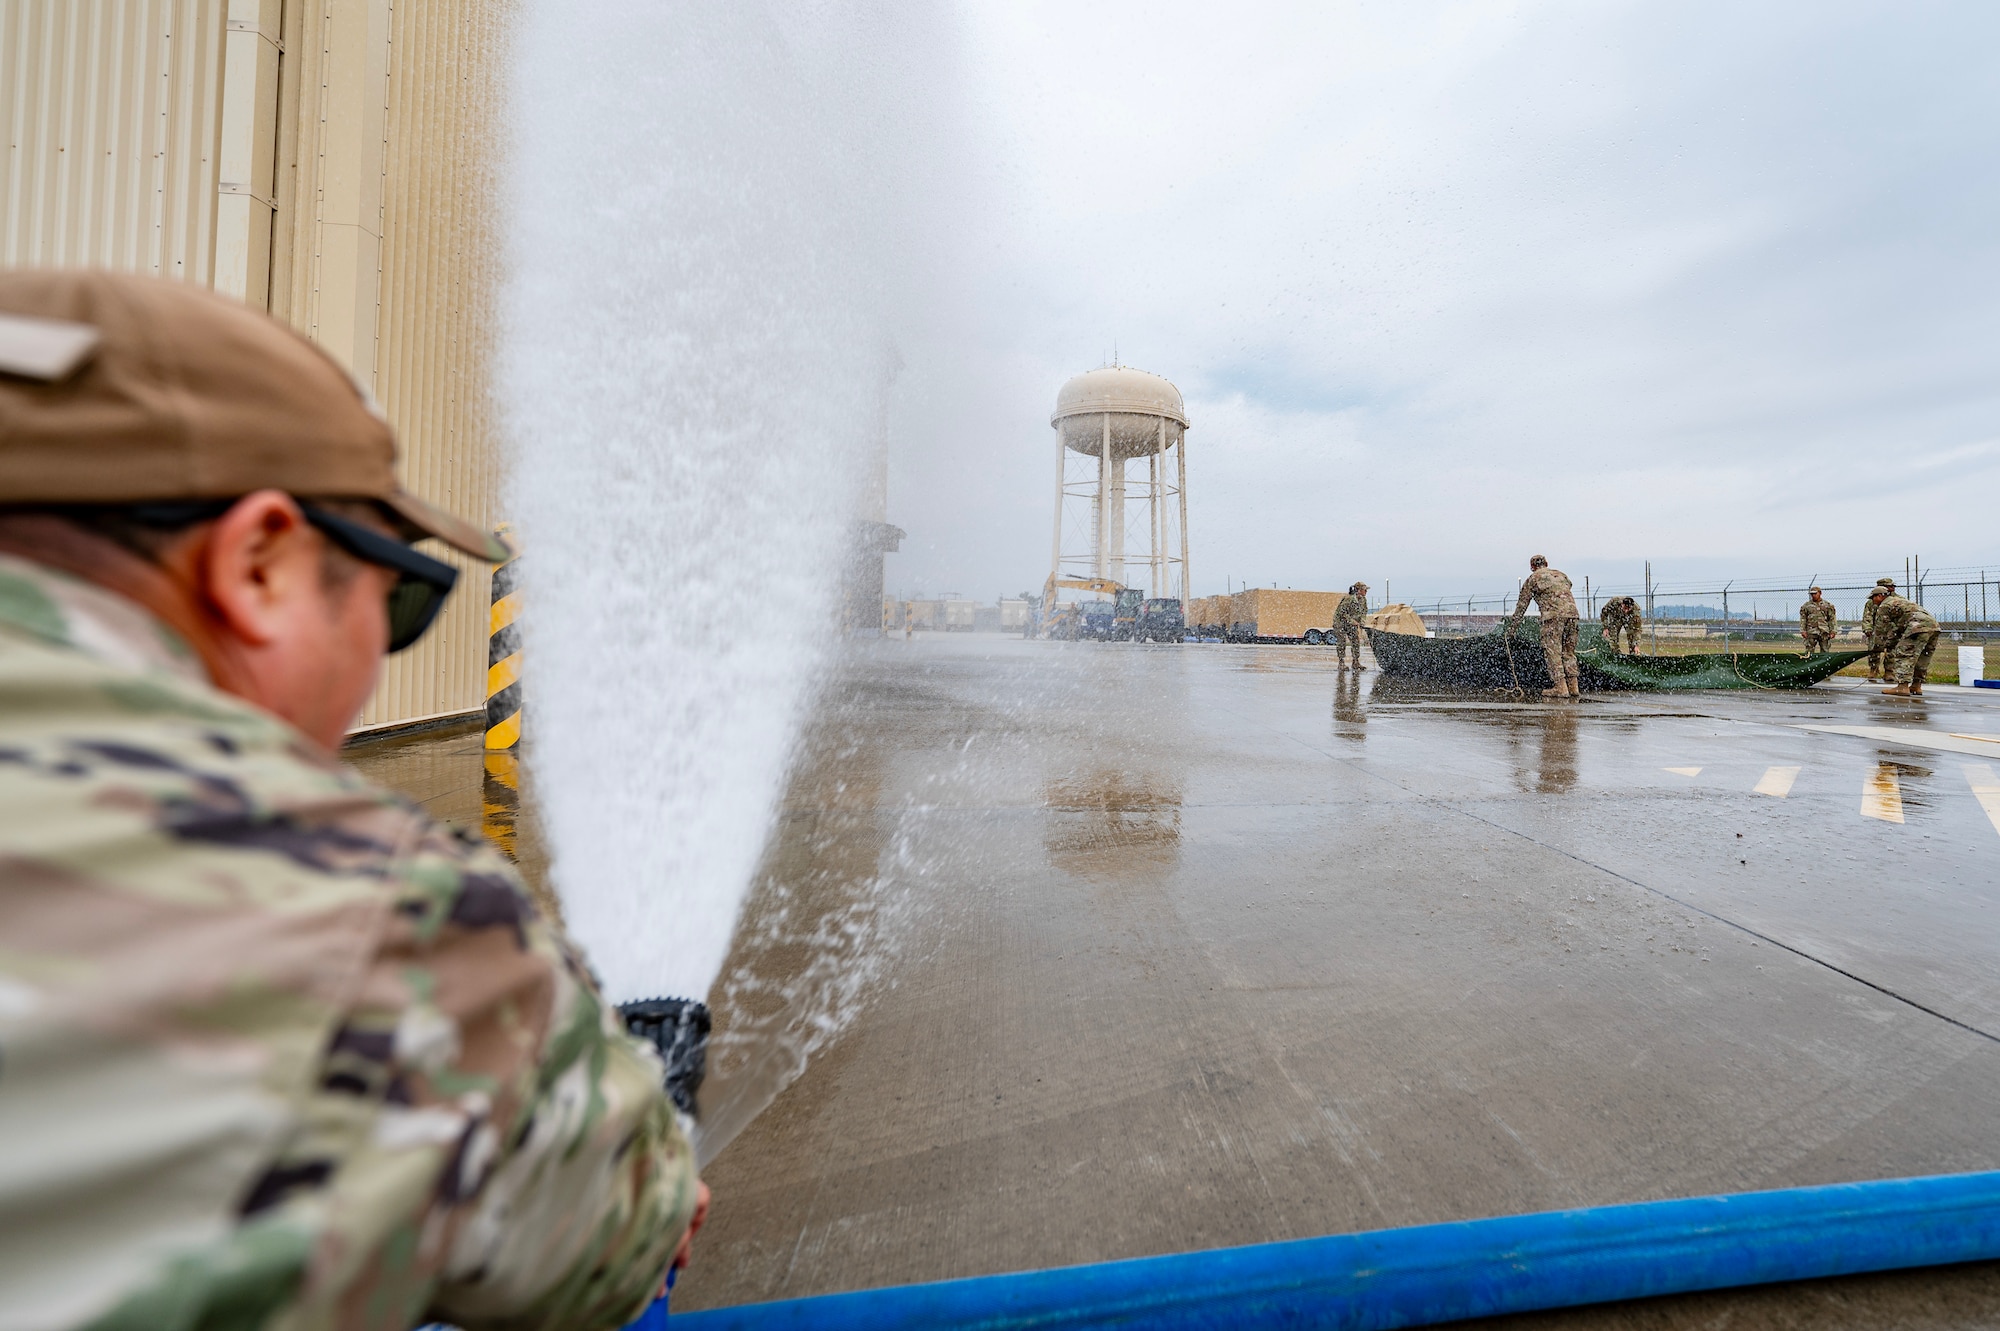 Airman sprays water to simulate a storm during a Prime Base Engineer Emergency Force or “Prime BEEF” training at Kunsan Air Base.